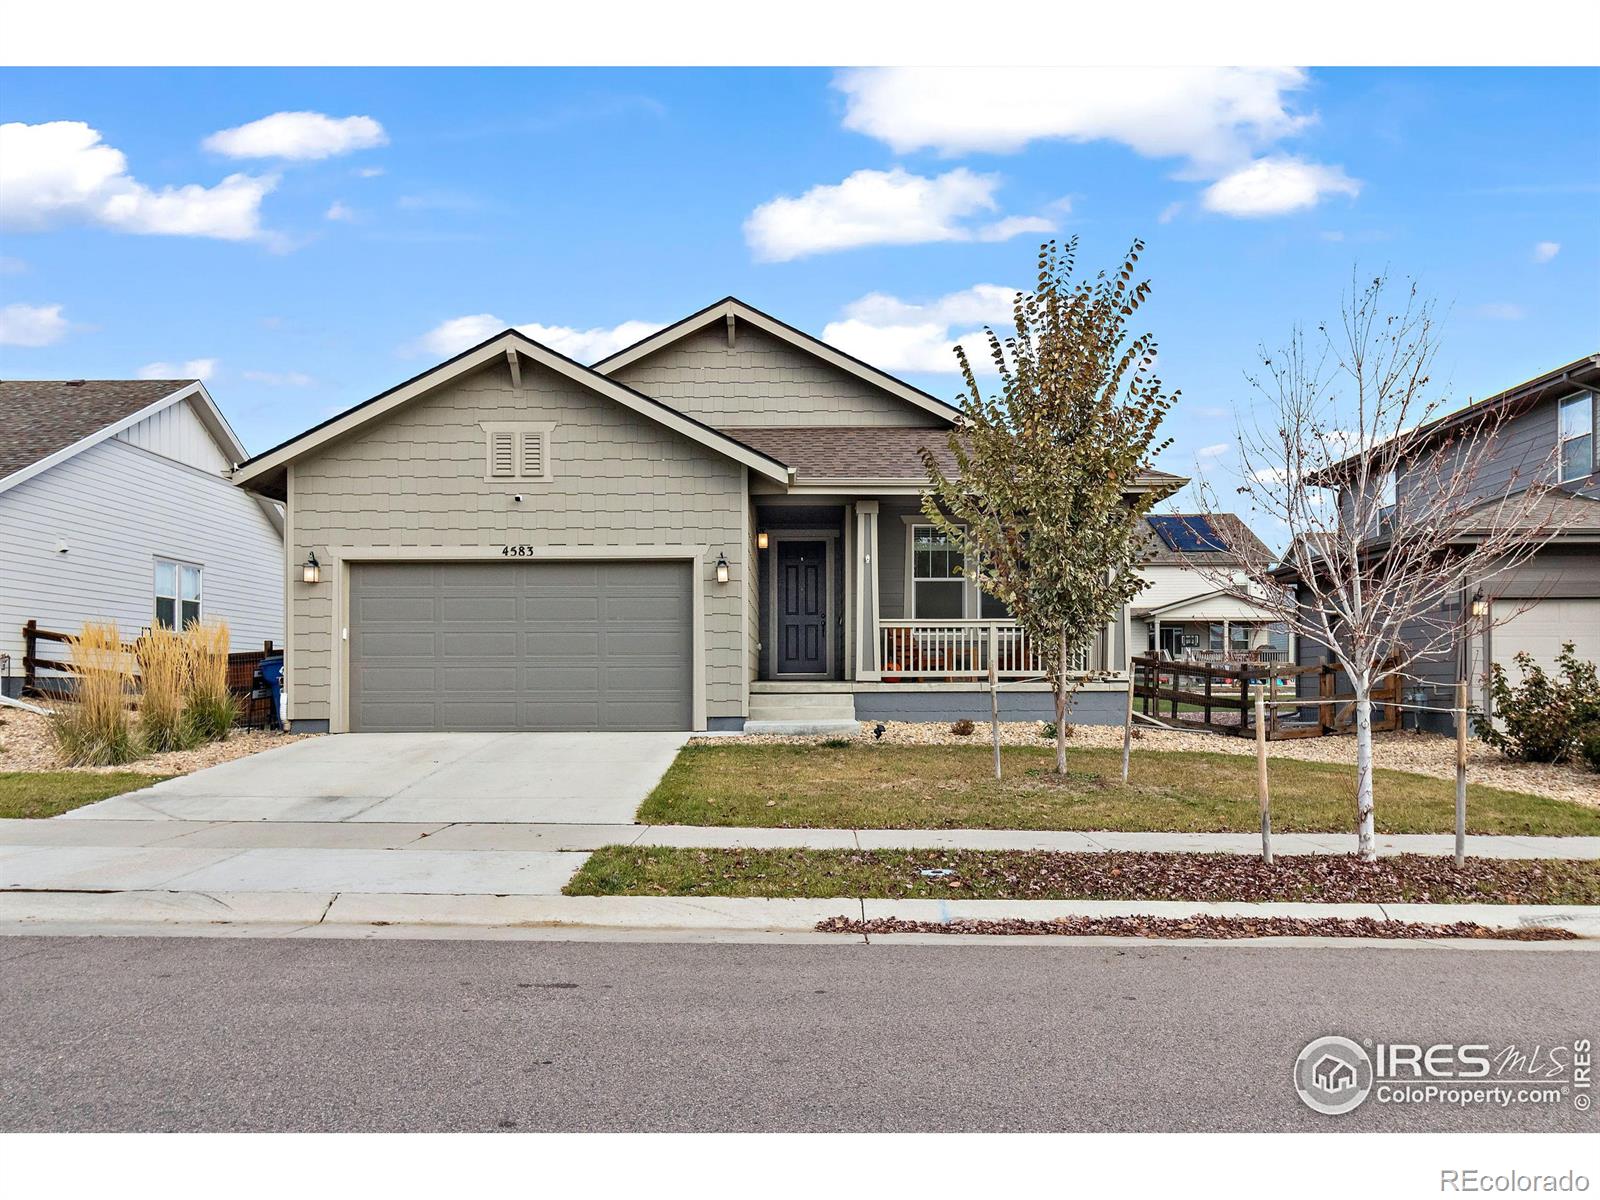 4583  clear creek drive, Firestone sold home. Closed on 2024-03-18 for $515,000.